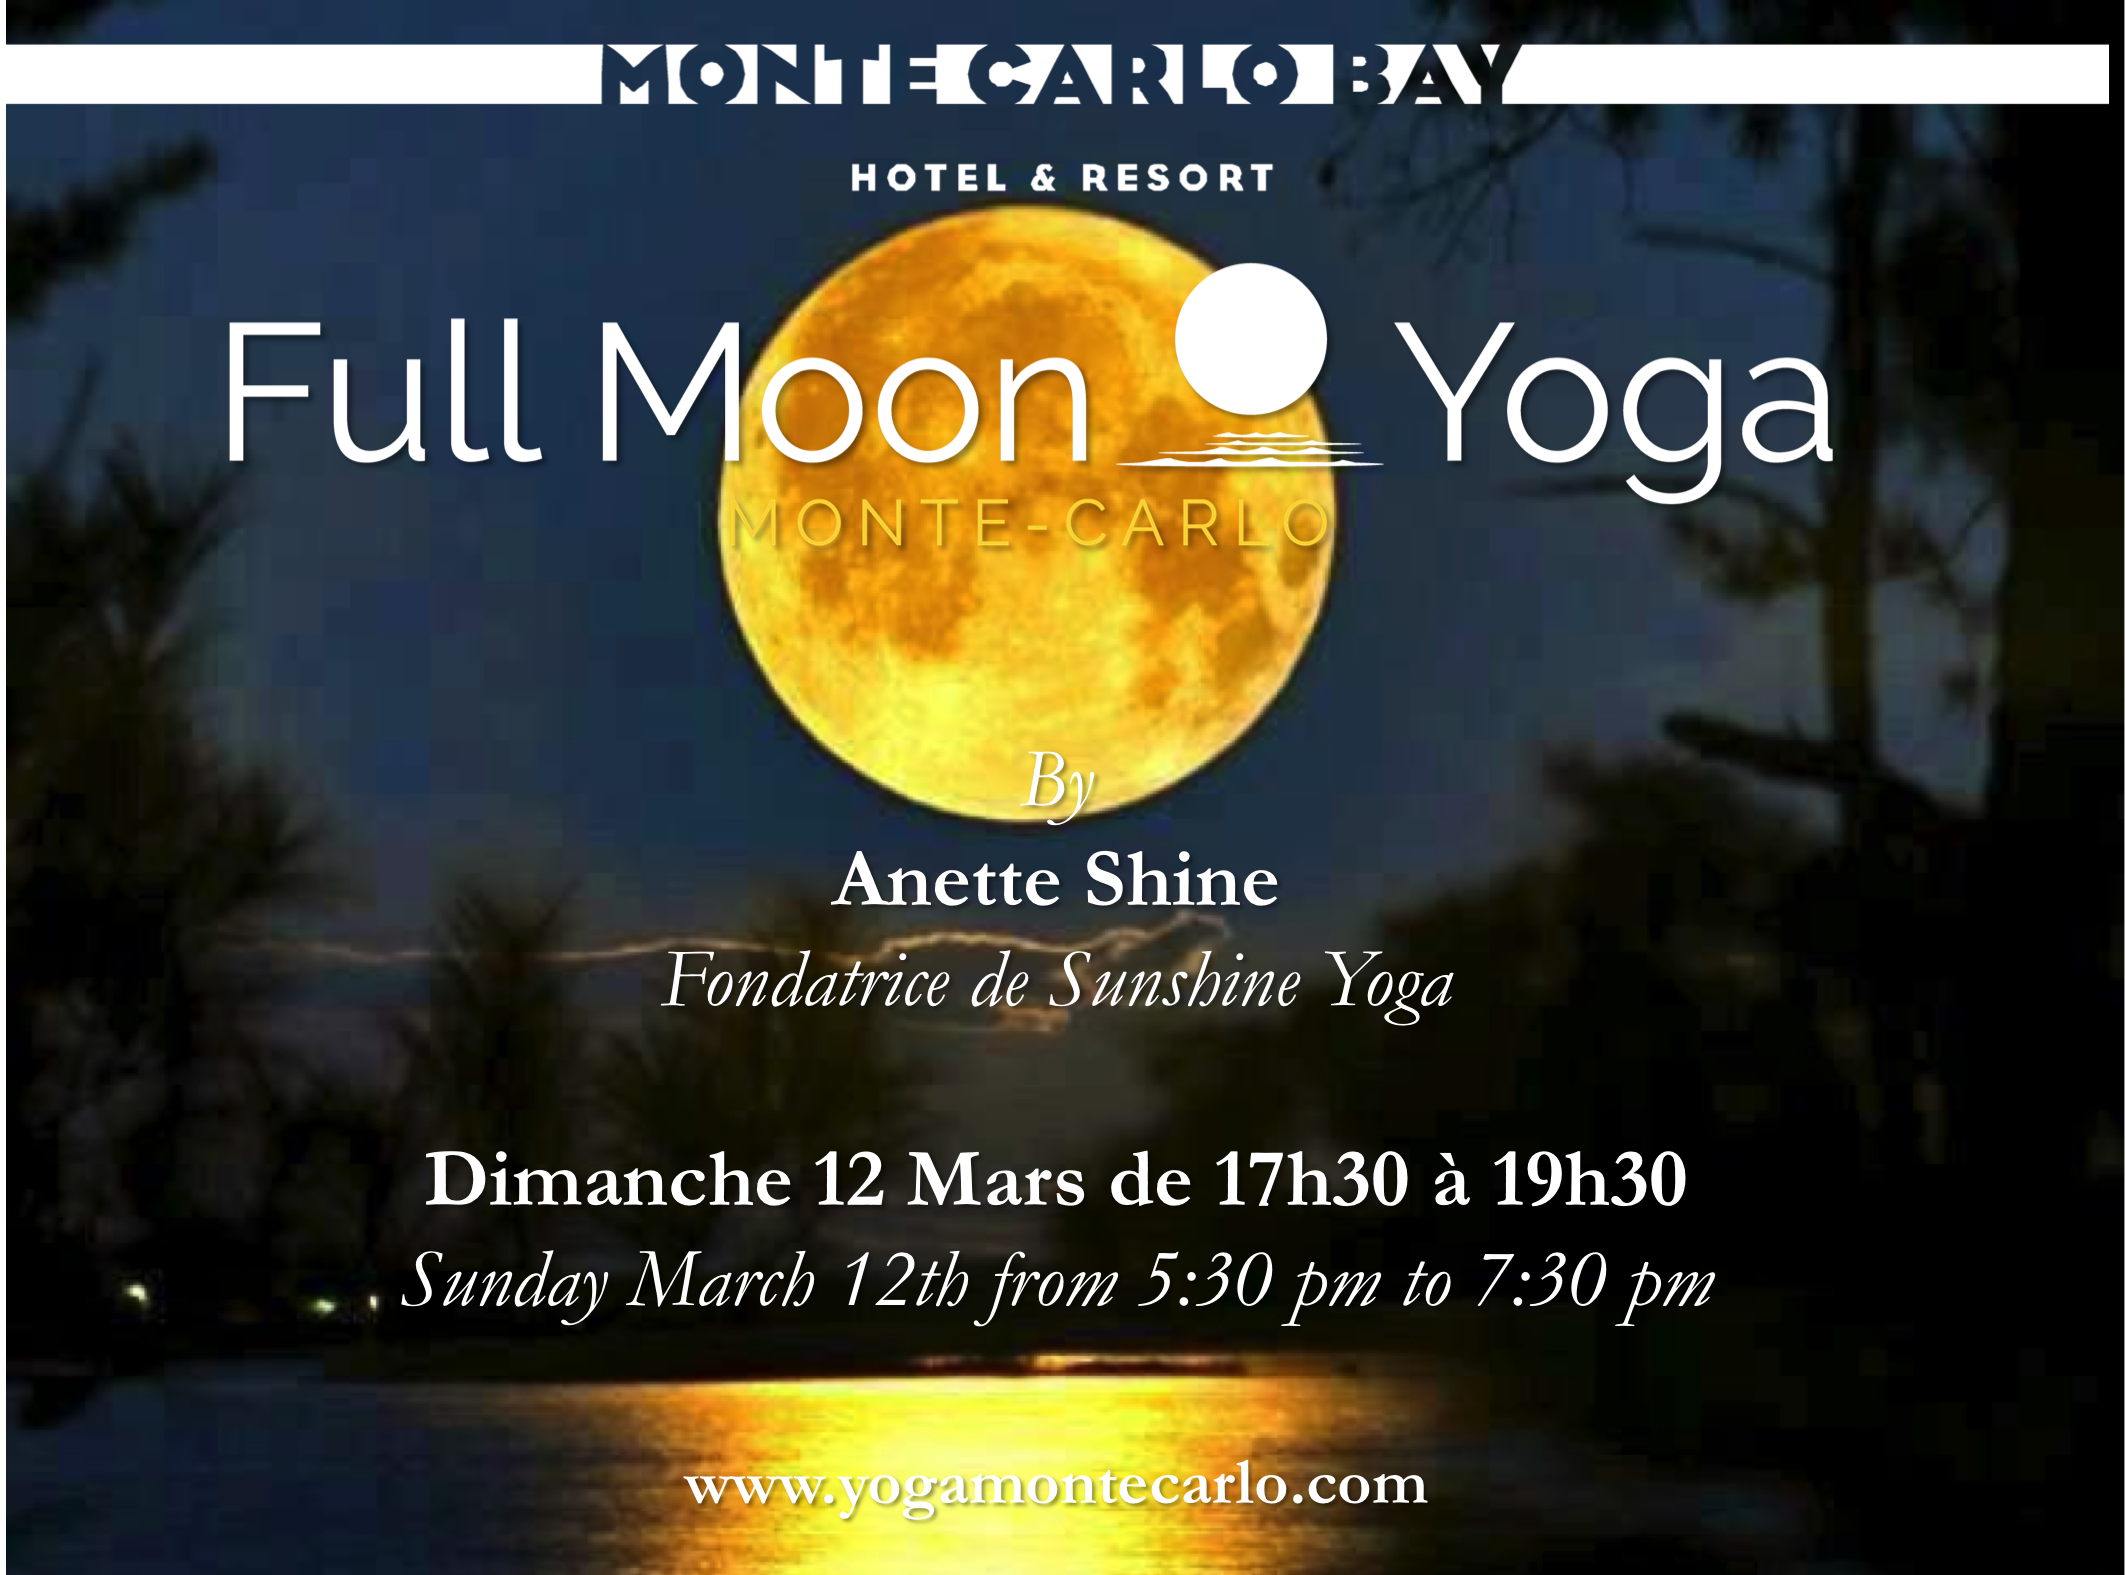 You are currently viewing Full Moon Yoga Monte Carlo on Sunday March 12th